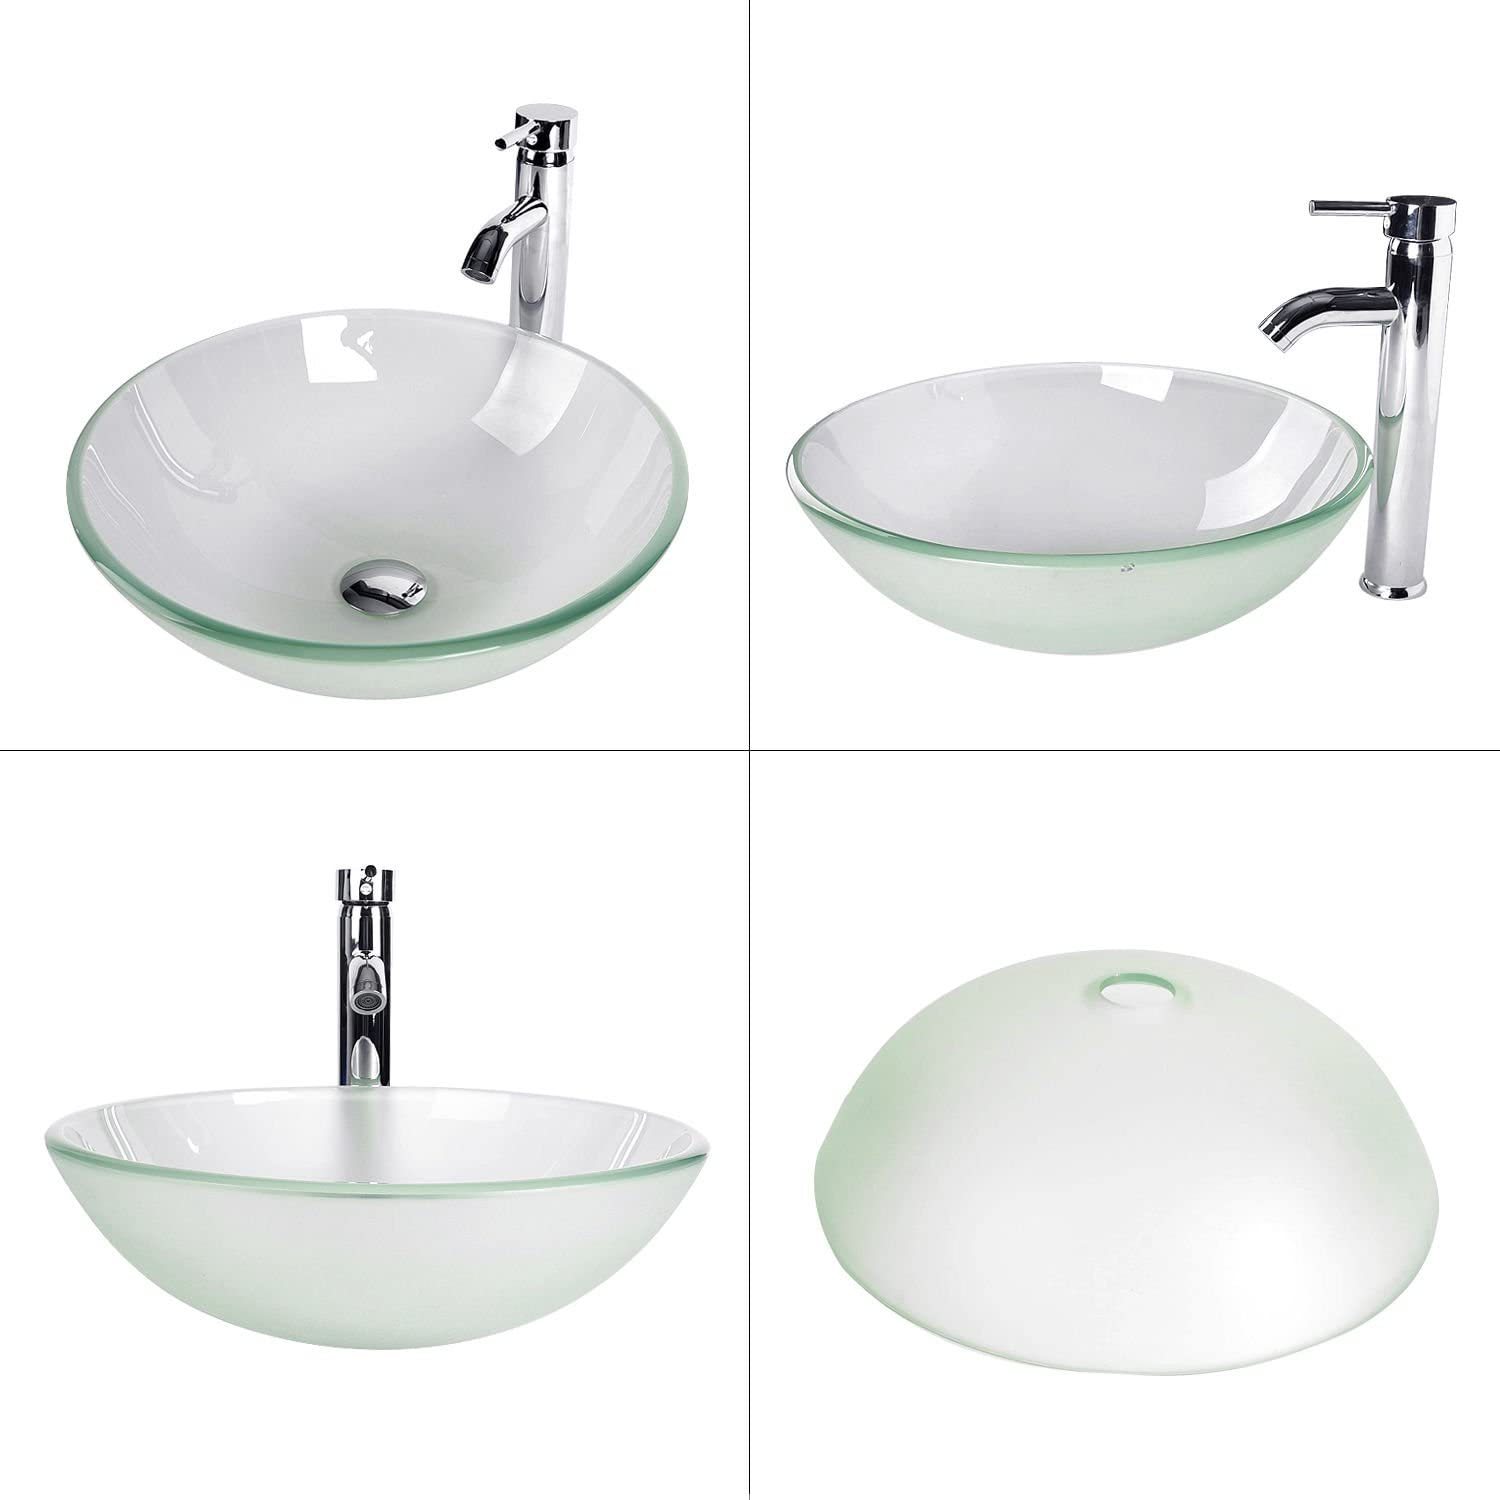 4 Angles of frosted glass sink